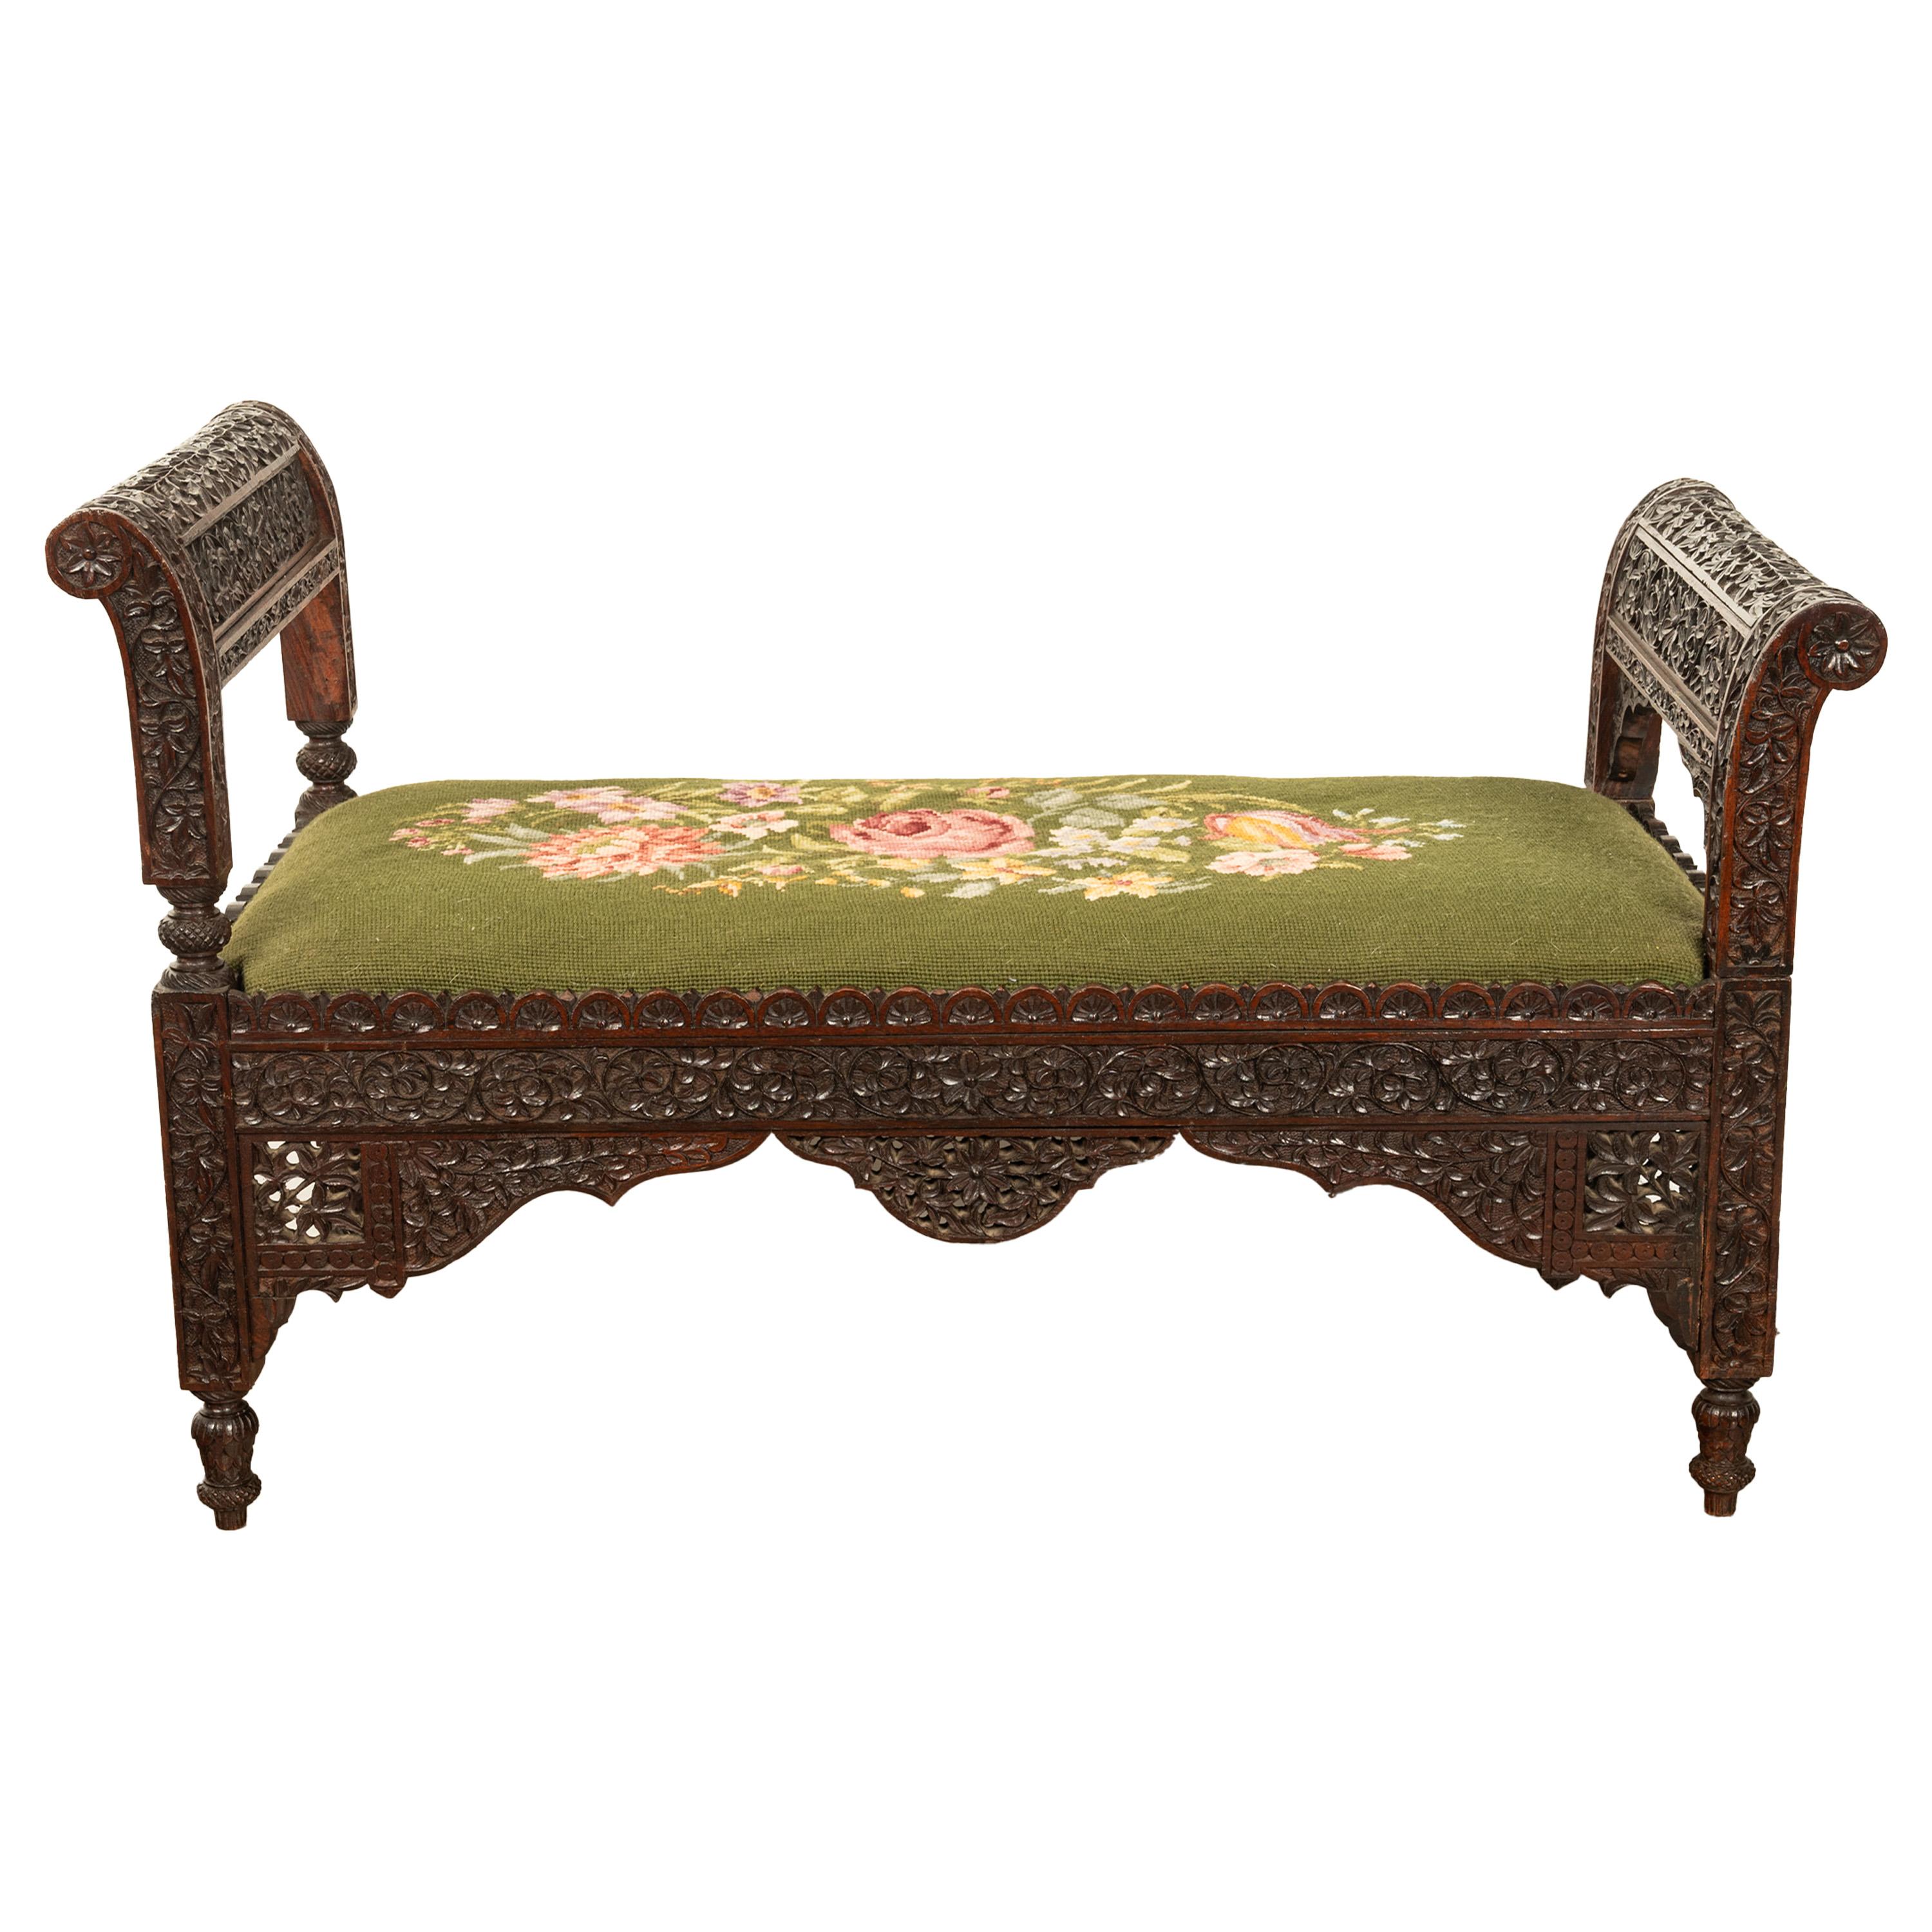 A very good antique Anglo-Indian carved rosewood window seat, bench, circa 1860.
The bench being very finely carved from rosewood, with curved rests at each side & carved and pierced and with rosettes and scrolling foliate. The seat with an